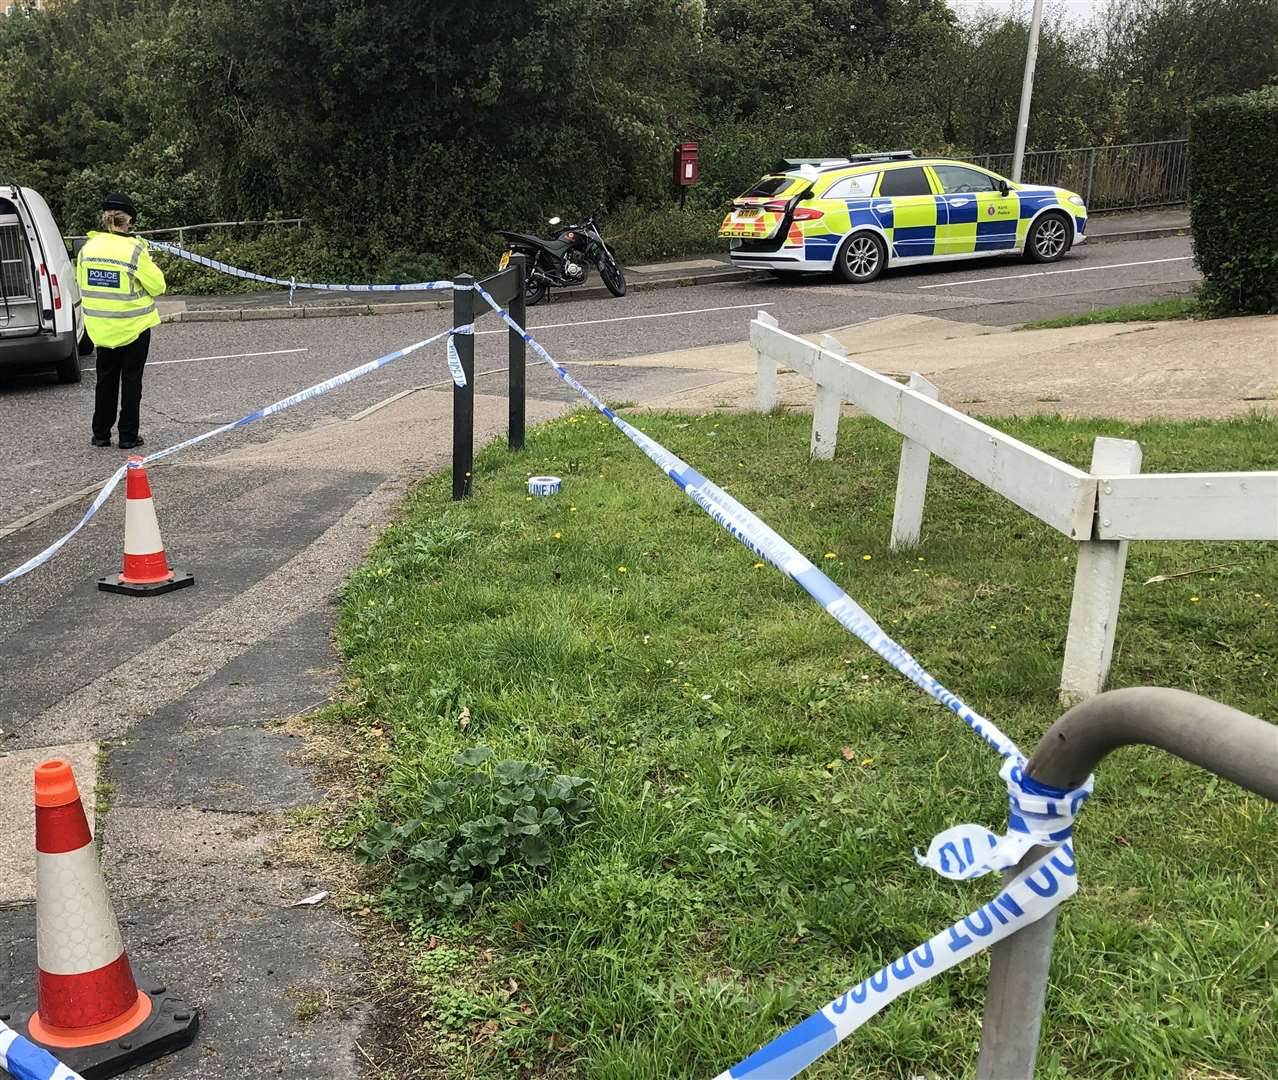 Police have cordoned off a large area around Wiltshire Close in Chatham